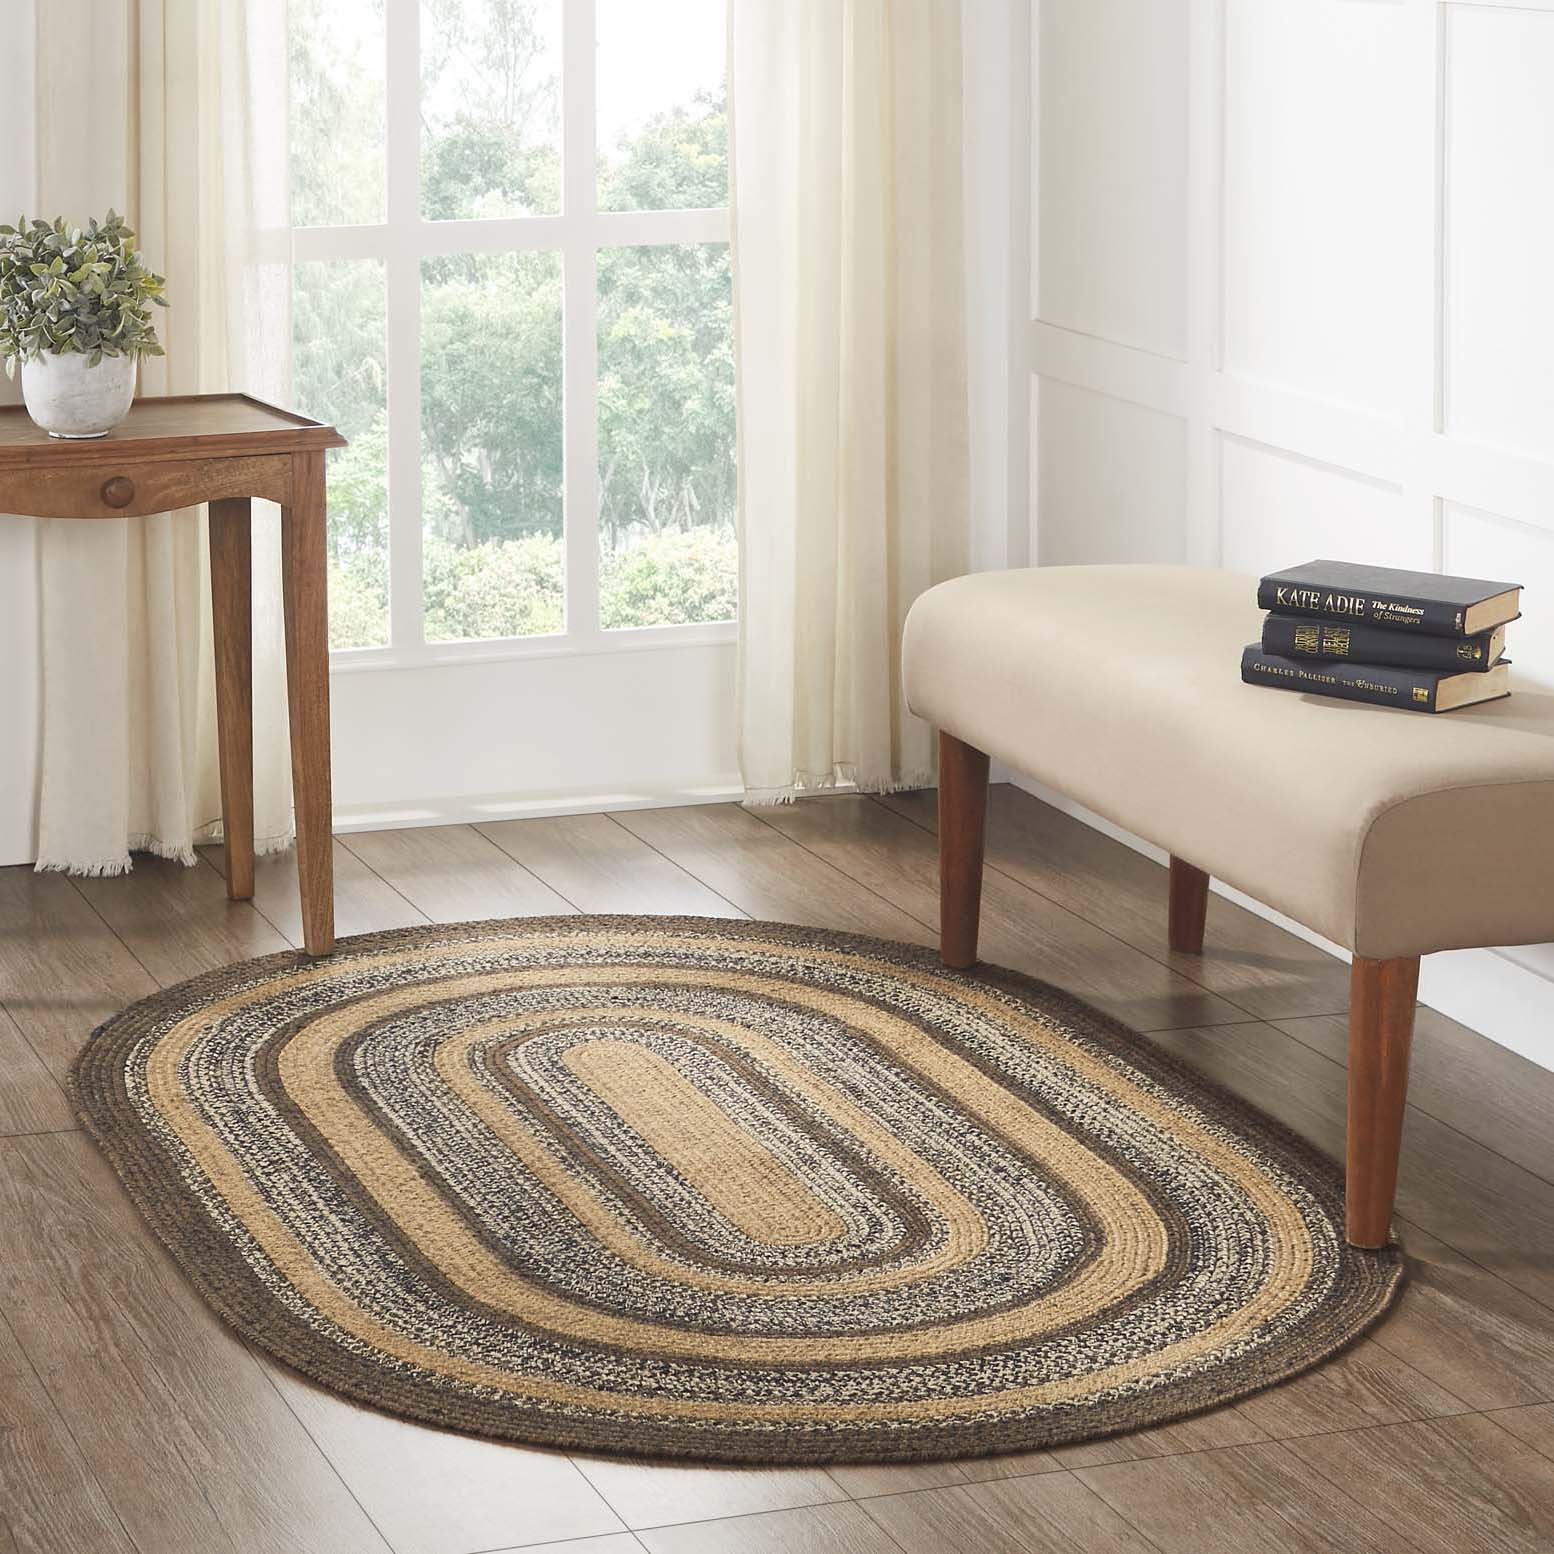 Espresso Jute Braided Rug Oval with Rug Pad 4'x6' VHC Brands